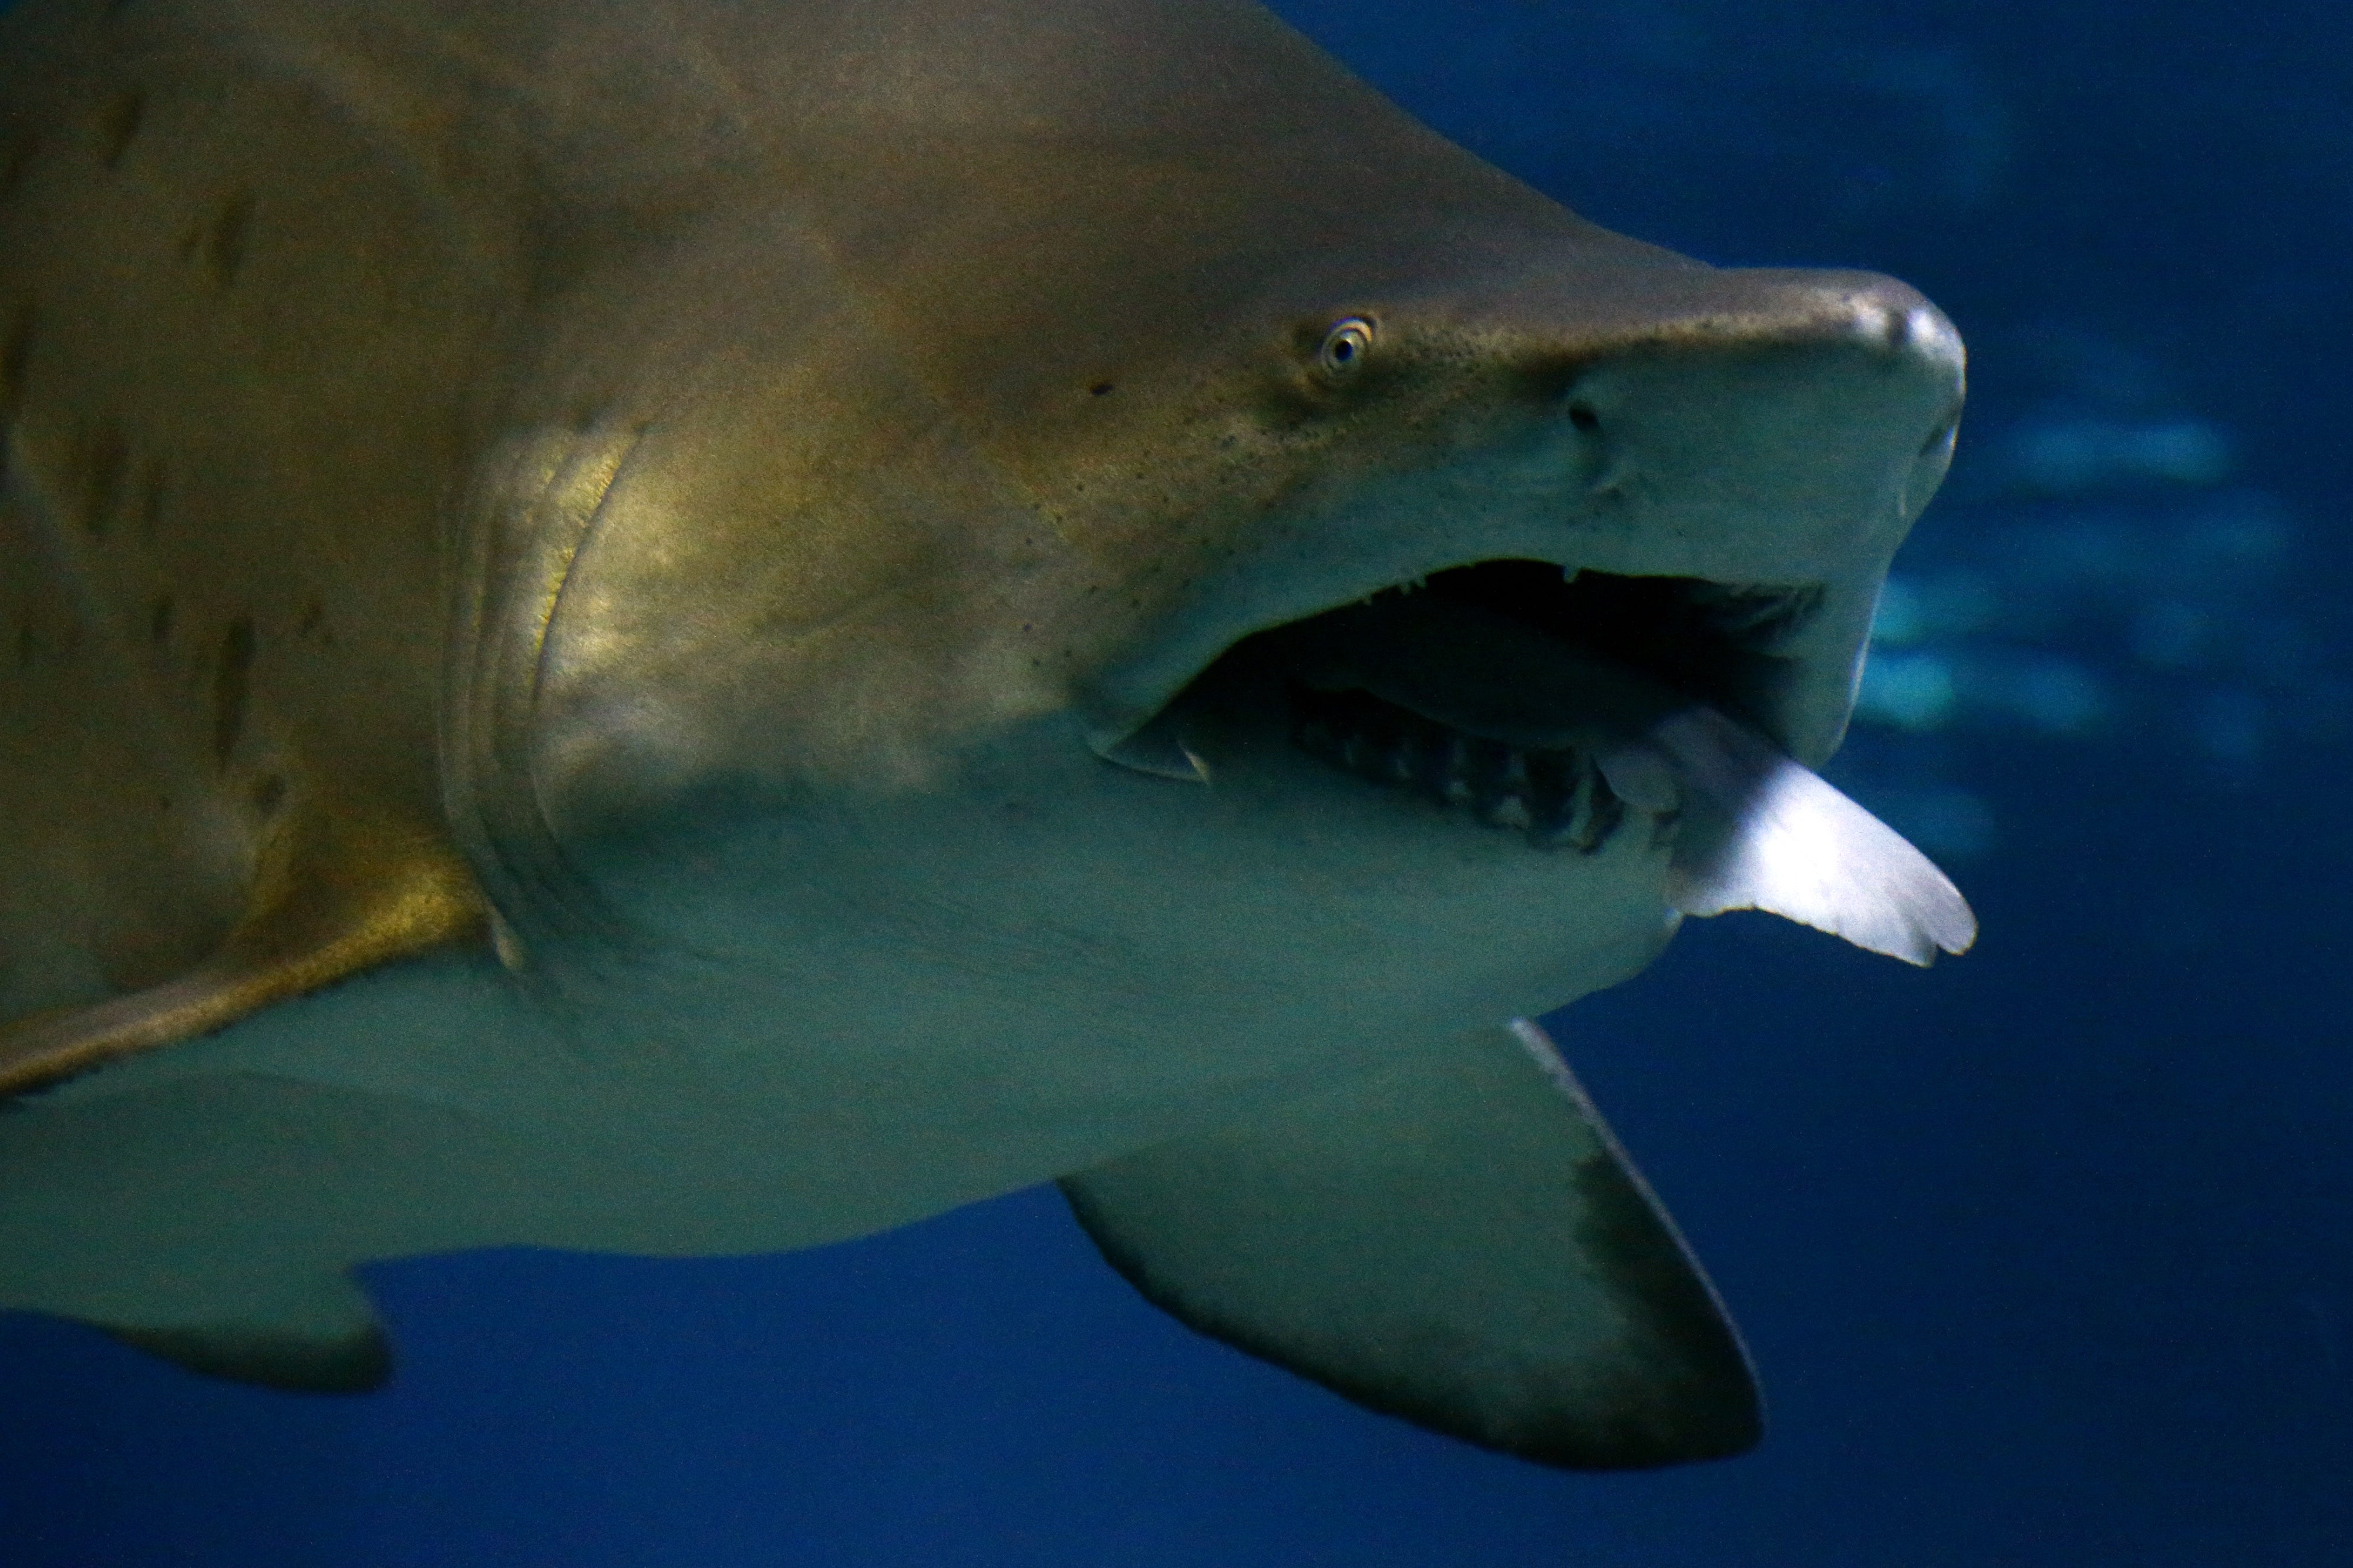 Two large tiger sharks were seen near the area of the incident